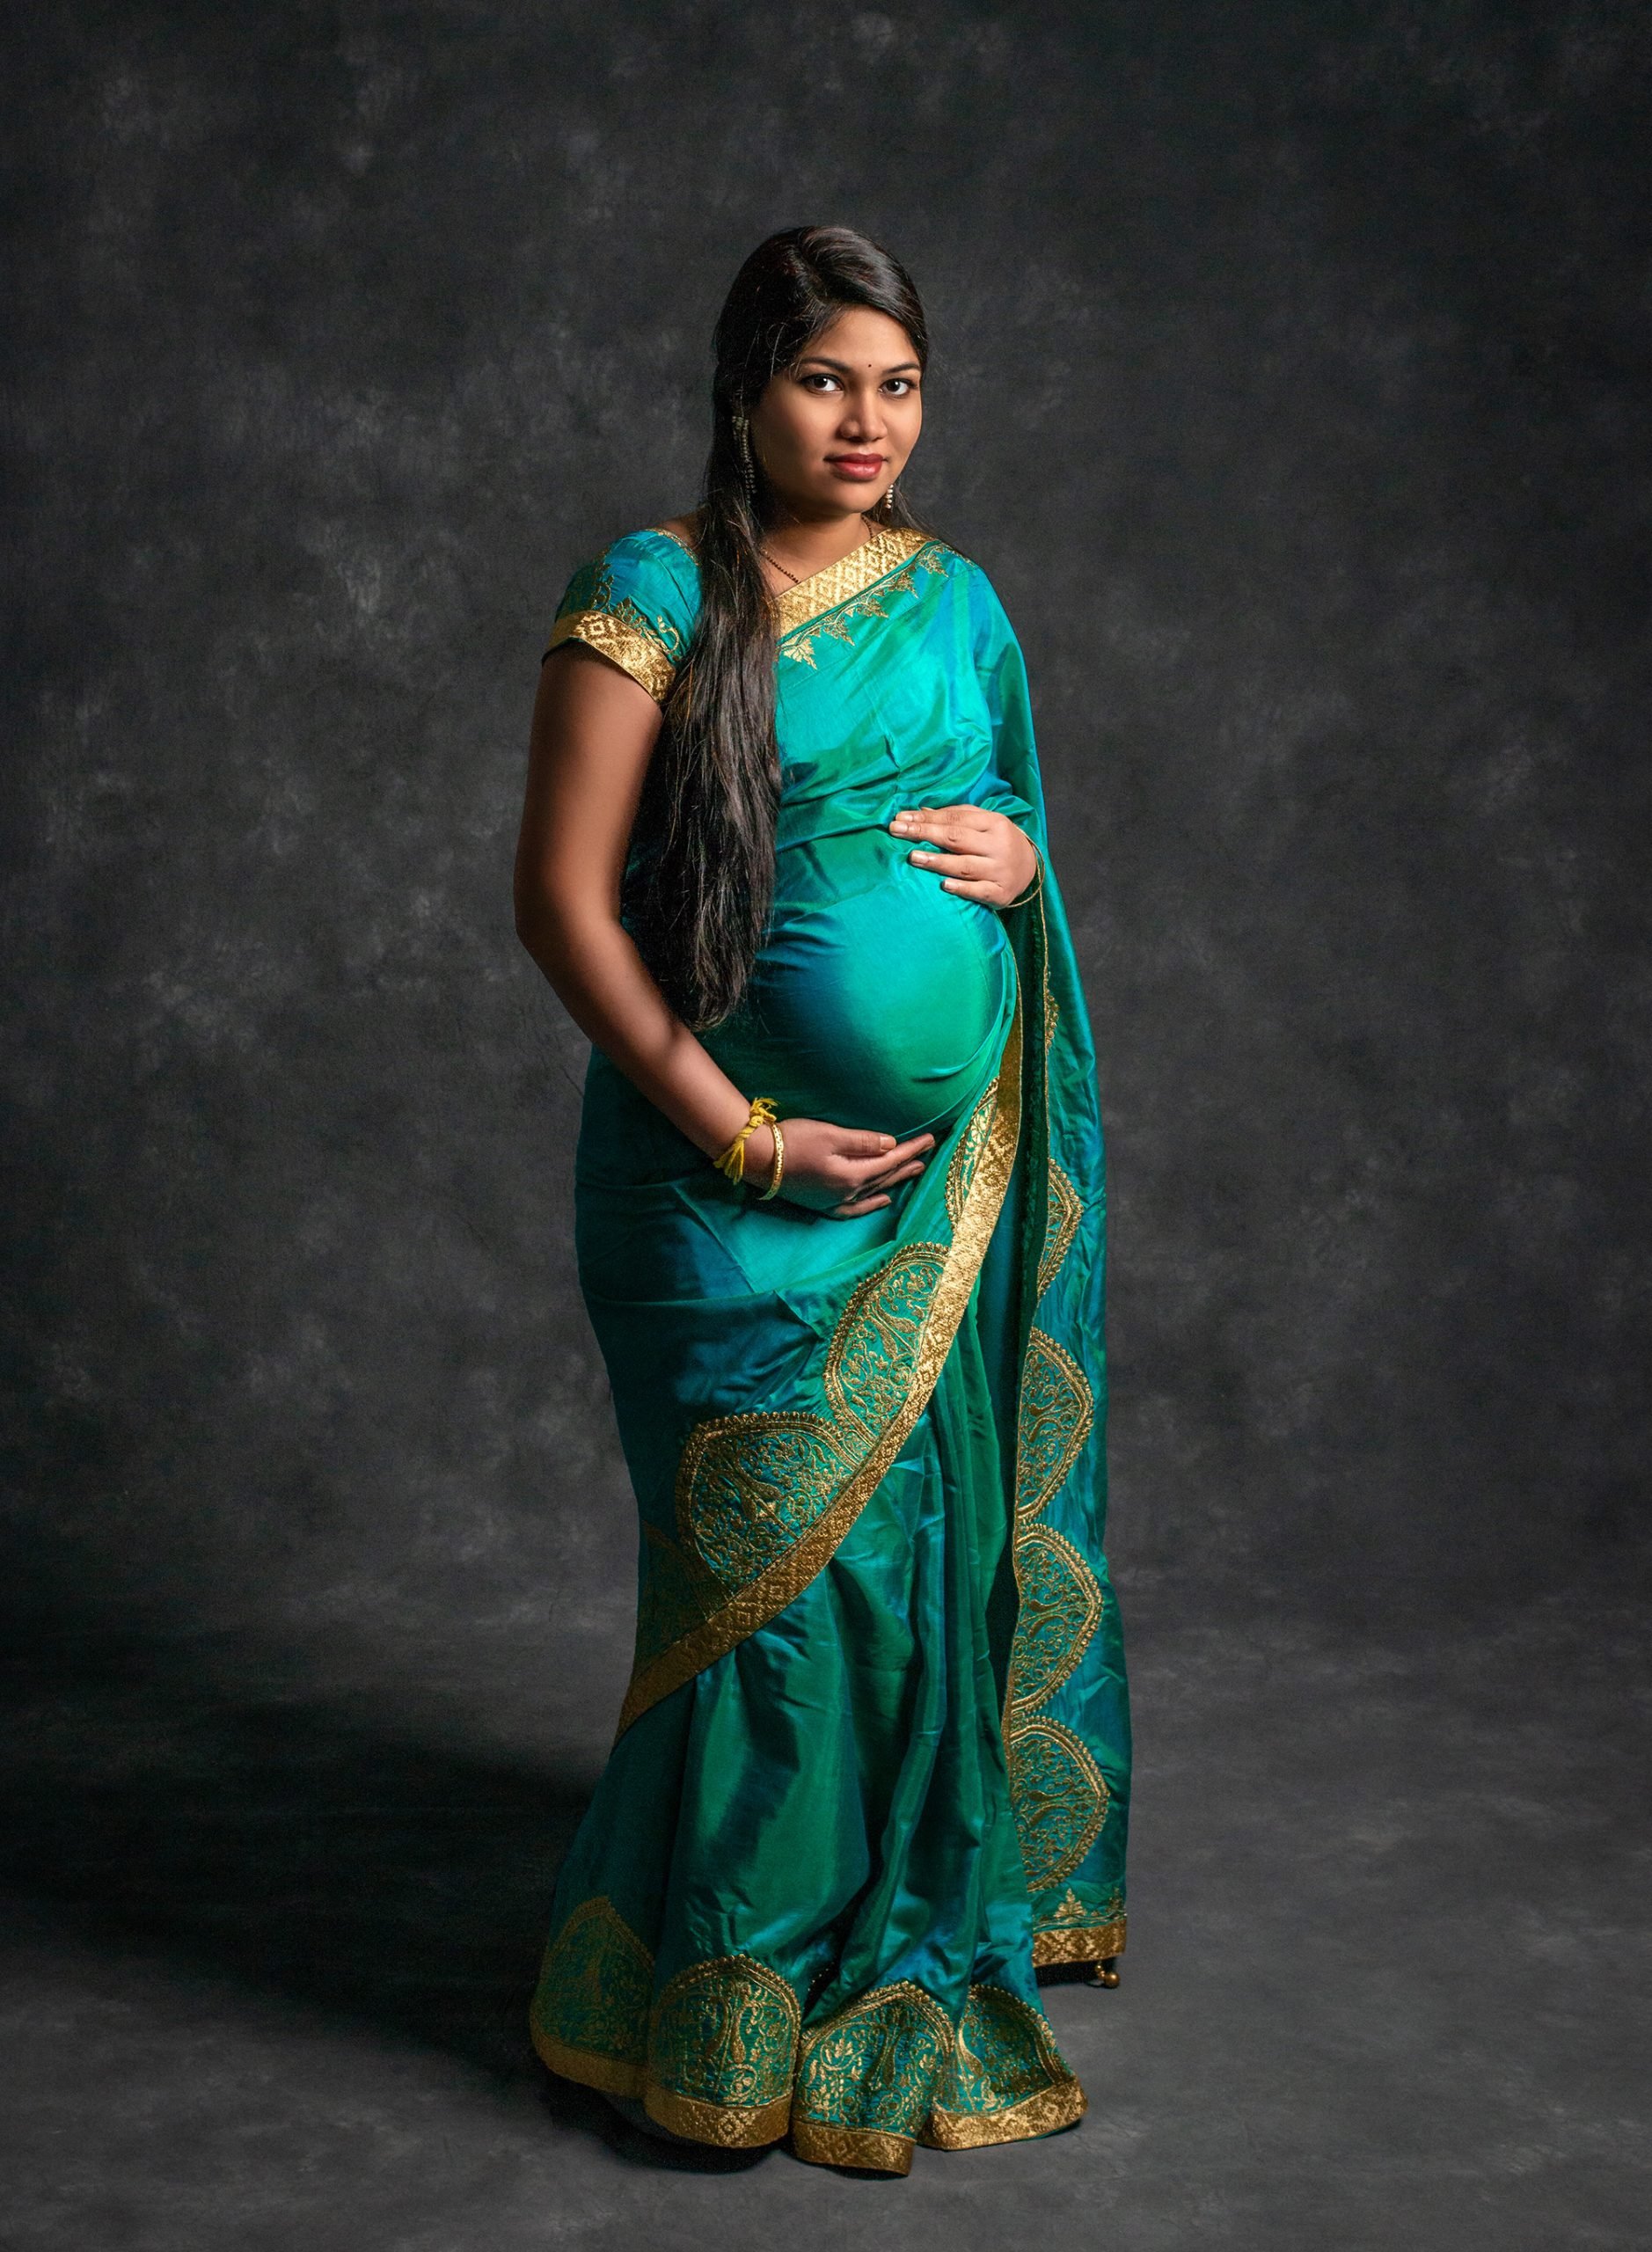 Traditional Indian clothes maternity photo pregnant woman posing holding stomach in Indian dress clothing on gray backdrop